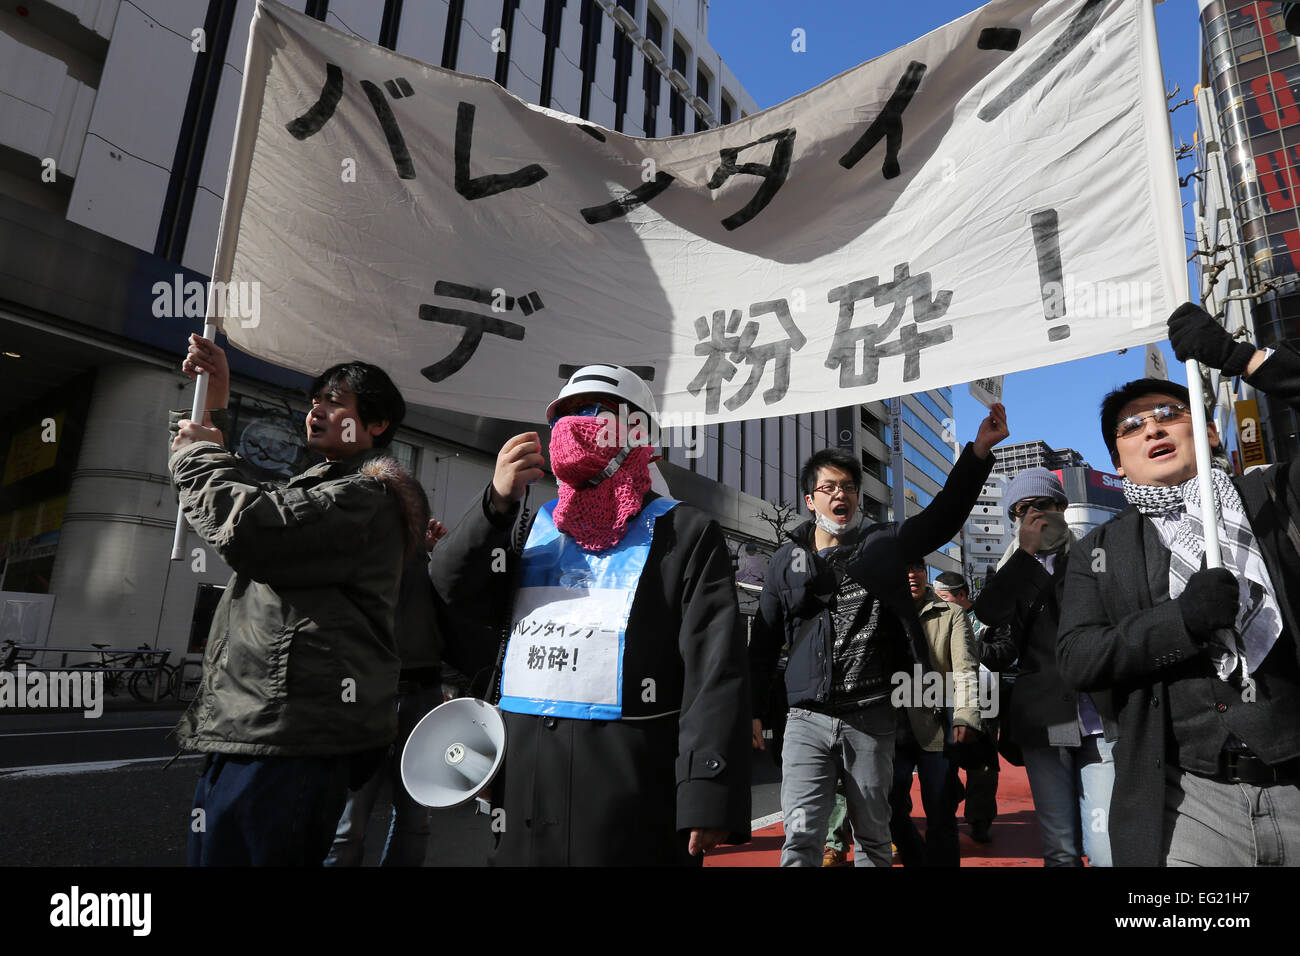 Demonstrators take part in 'Smash Valentine's Day' protest as they march through the streets of Shibuya district in Tokyo, Japan on February 14, 2015. The group called Kakuhidou, meaning 'Revolutionary alliance of men whom women find unattractive' protested that Valentine's Day is only about marketing and making money by chocolate companies. © Yuriko Nakao/AFLO/Alamy Live News Stock Photo